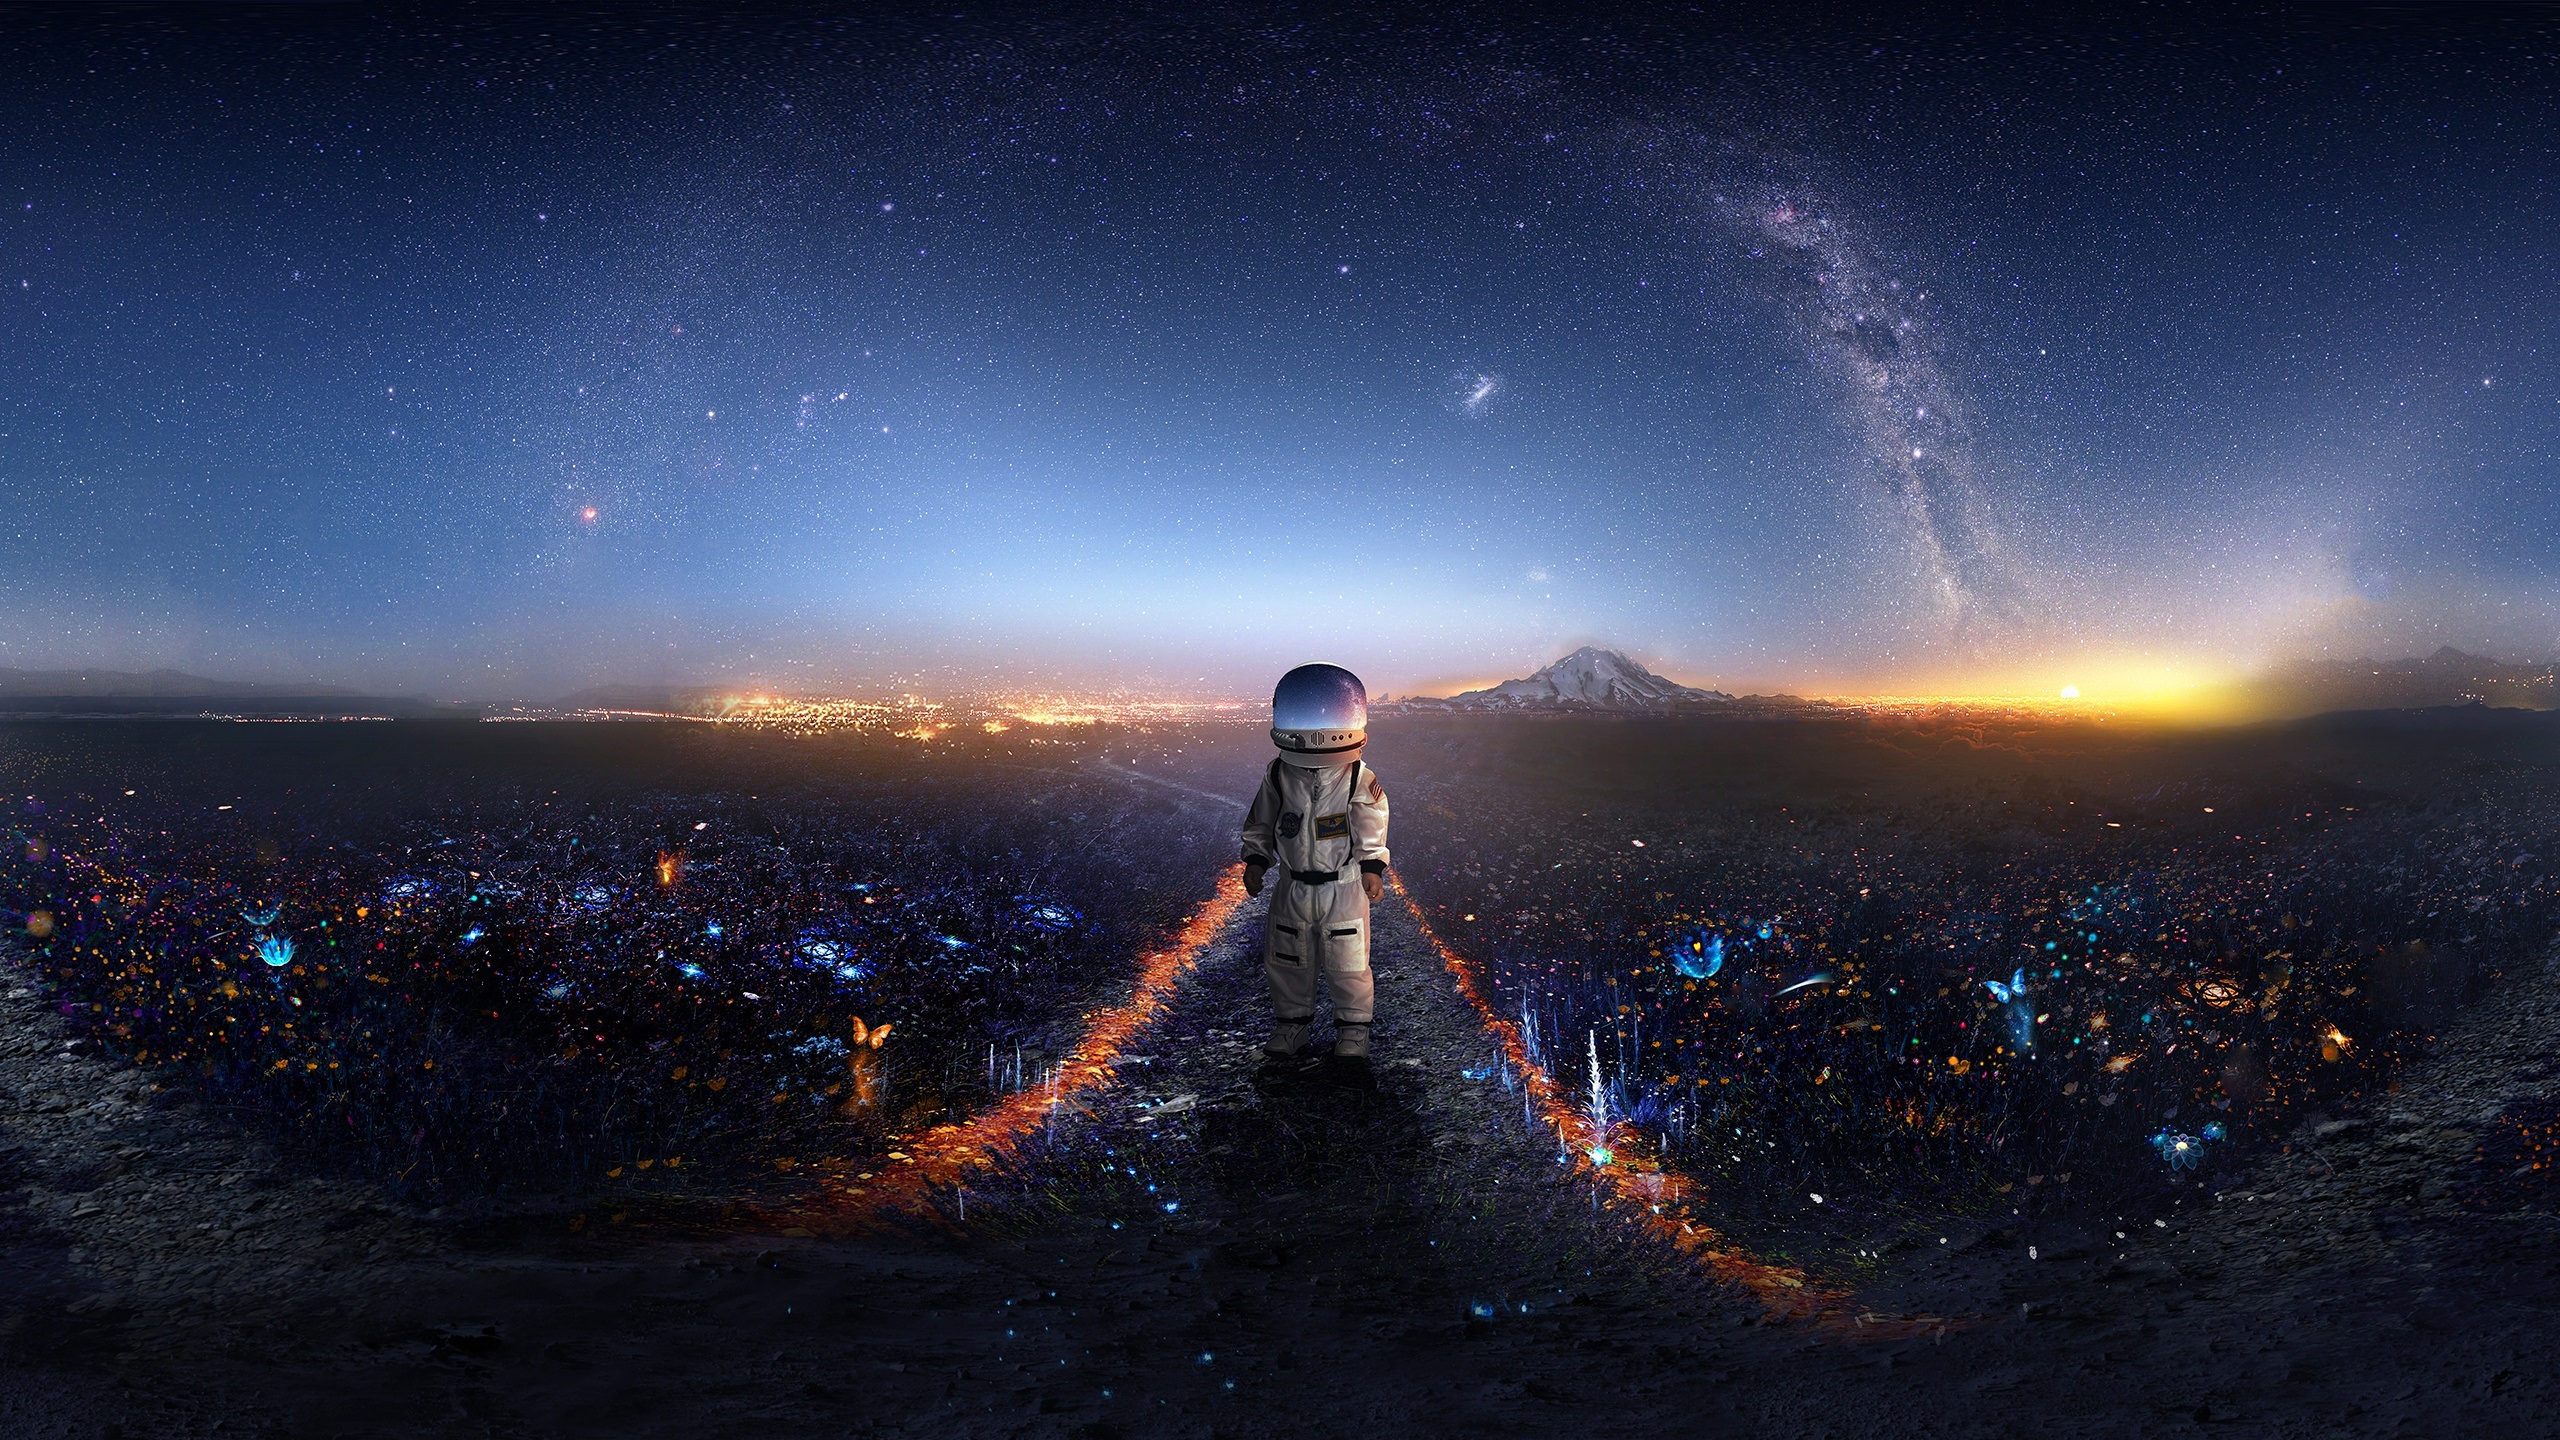 wallpaper 1920x1080 hd 1080p,sky,outer space,horizon,night,atmosphere